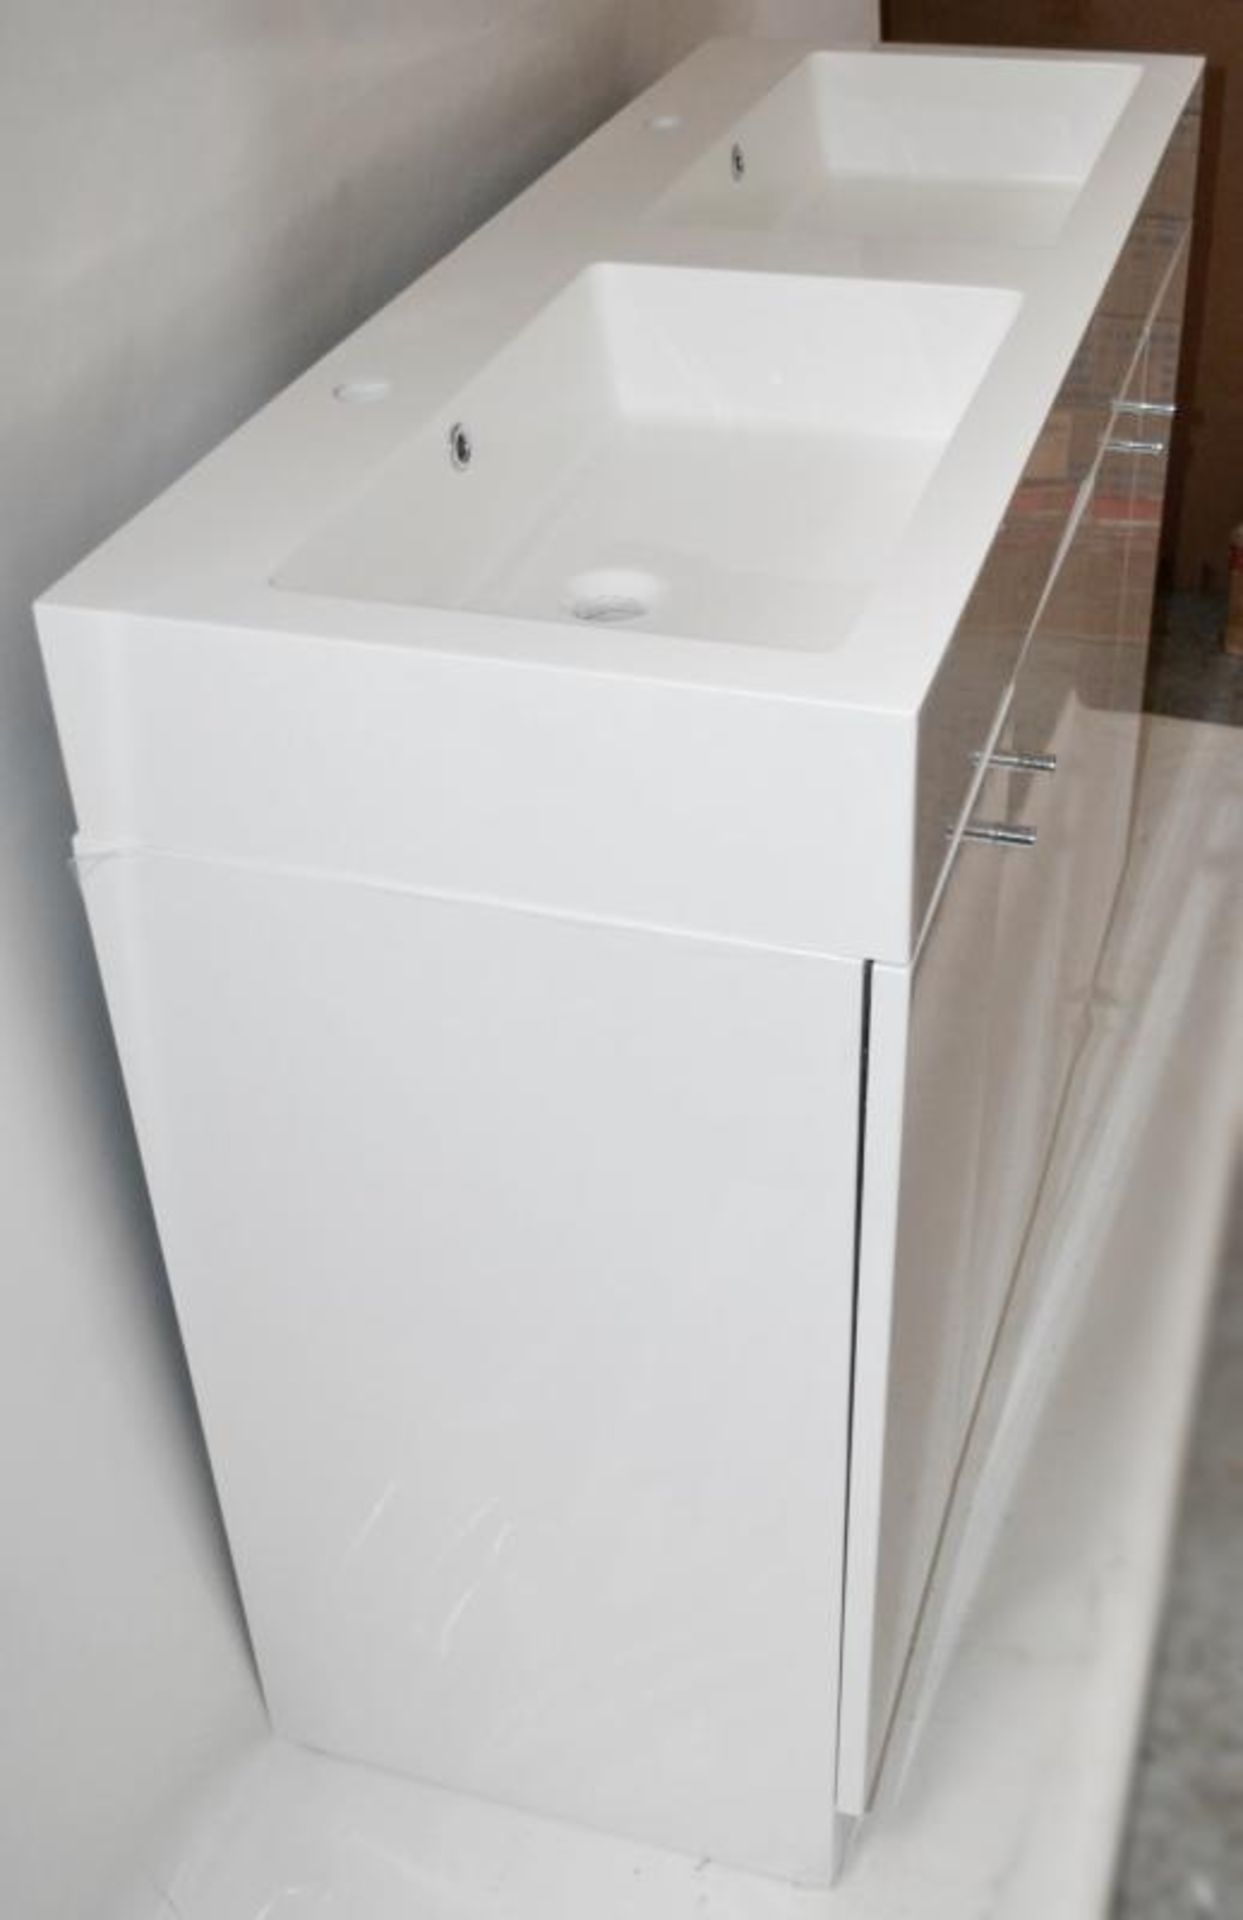 1 x His & Hers Double Bathroom Vanity Unit - 1200mm Wide - Features a High Gloss White Finish and - Image 4 of 7